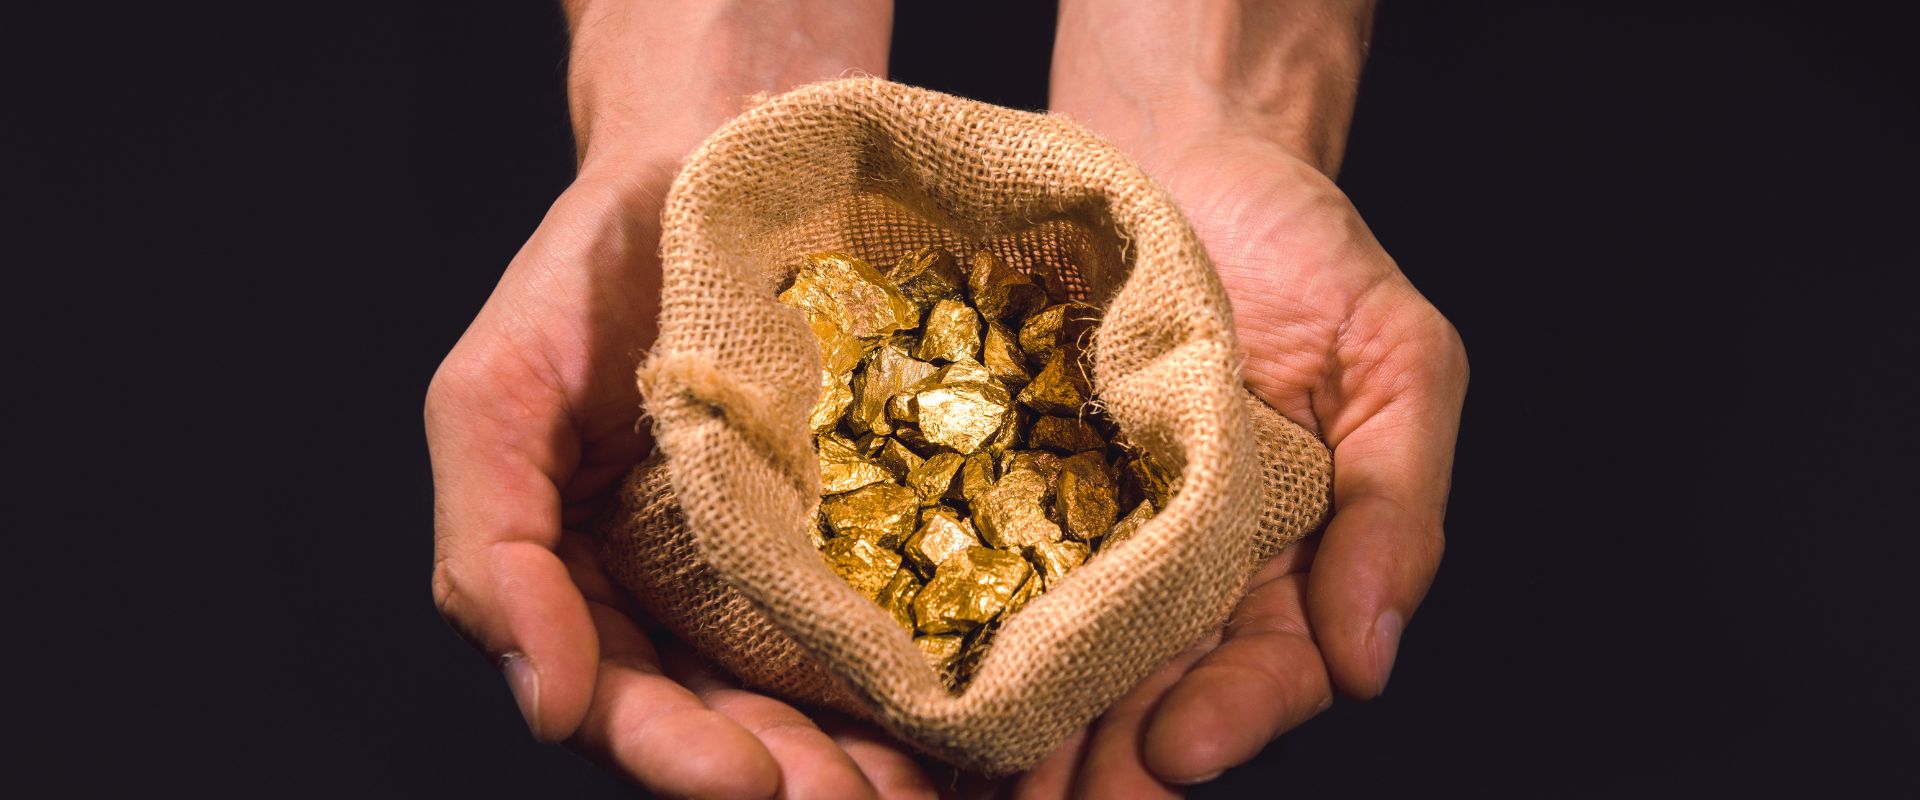 bag of gold nuggets in human hands